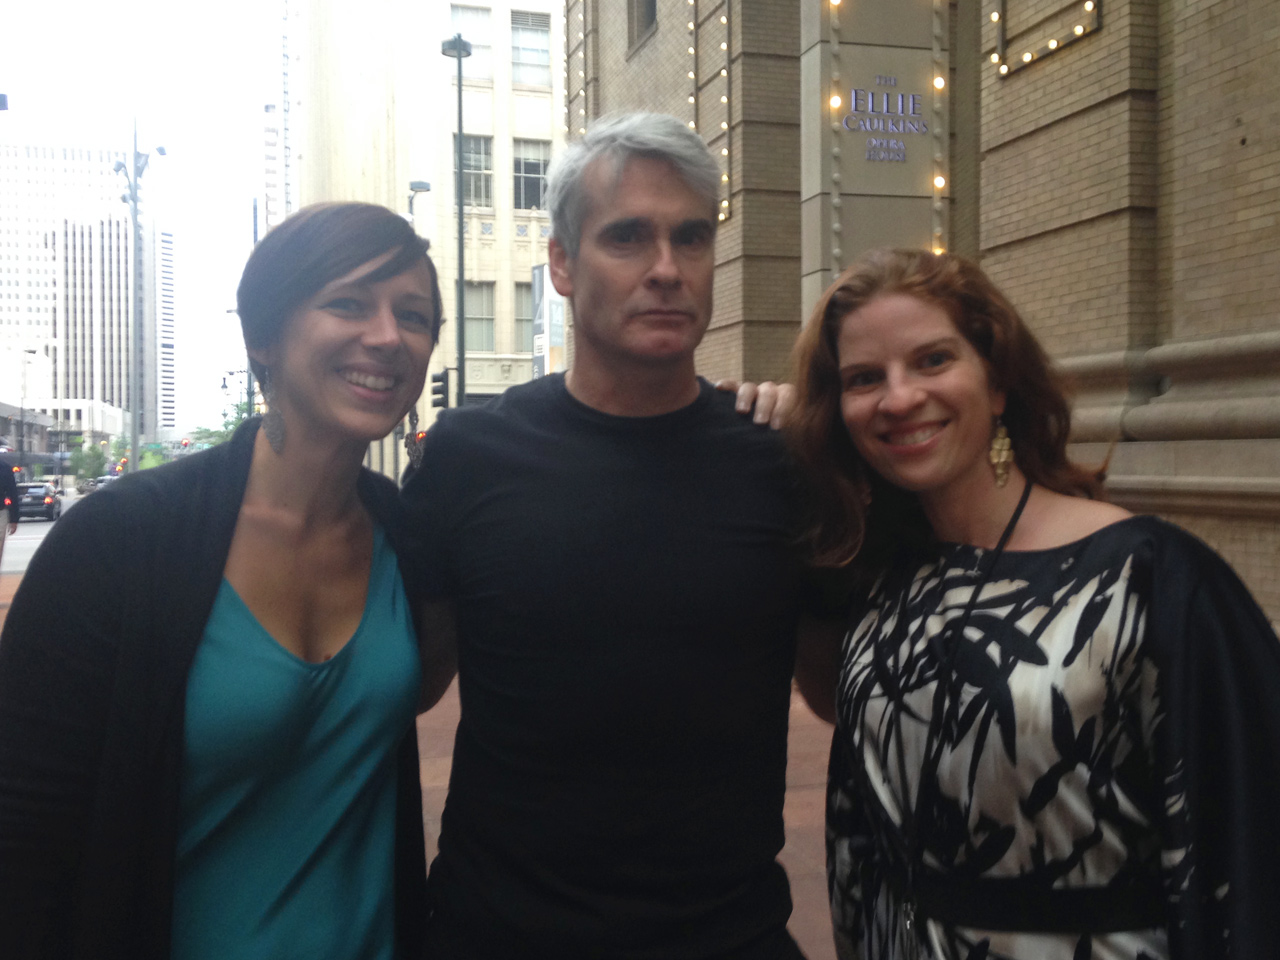 Meeting Henry Rollins was one of the huge highlights of the conference!